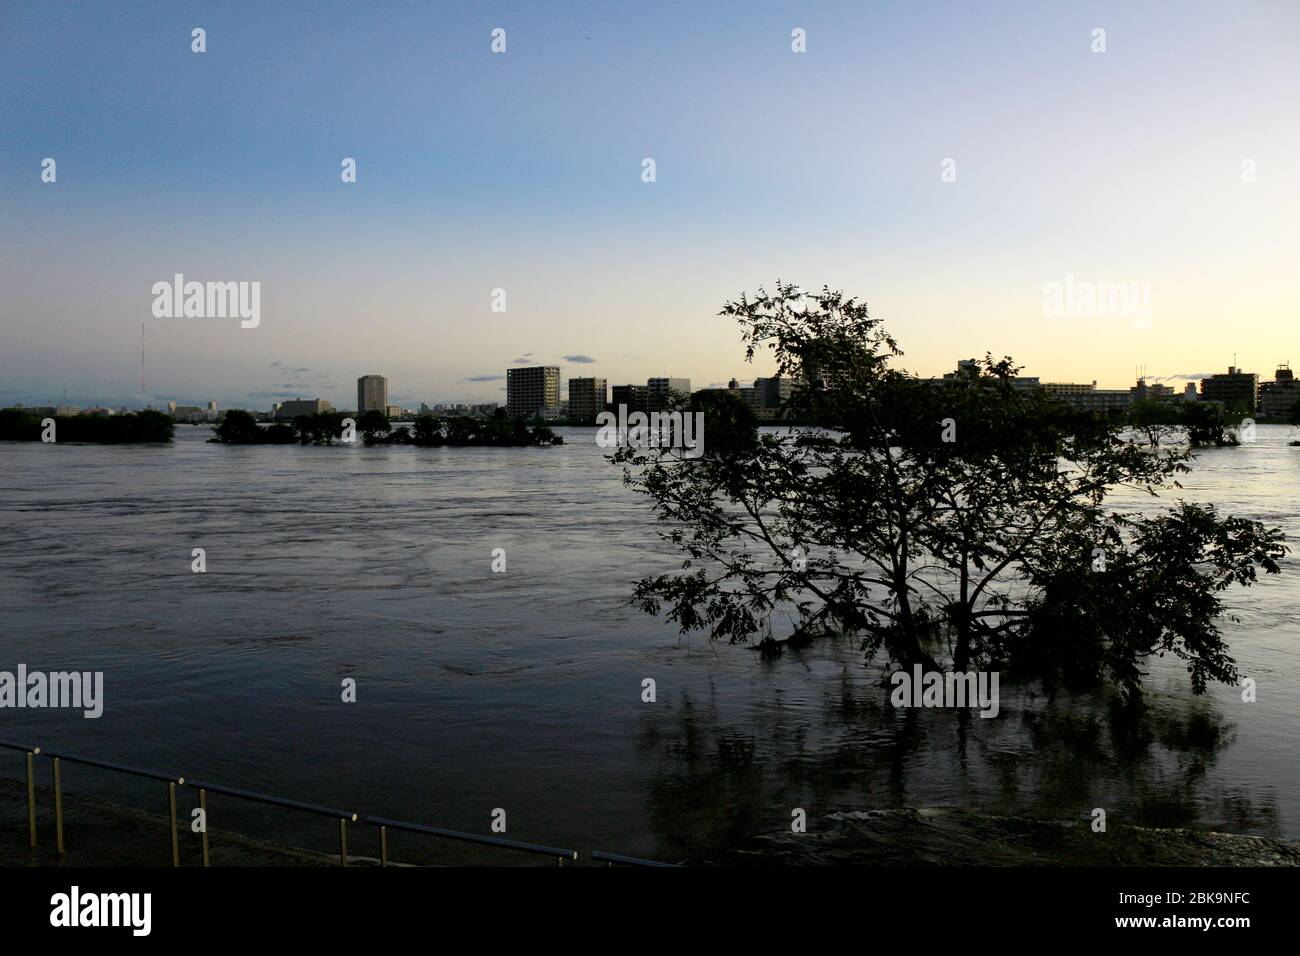 Scenery of the lower reaches of the Tama River in the morning when typhoon No. 19 accompanied by heavy rain passed by on October 13, 2019 Stock Photo